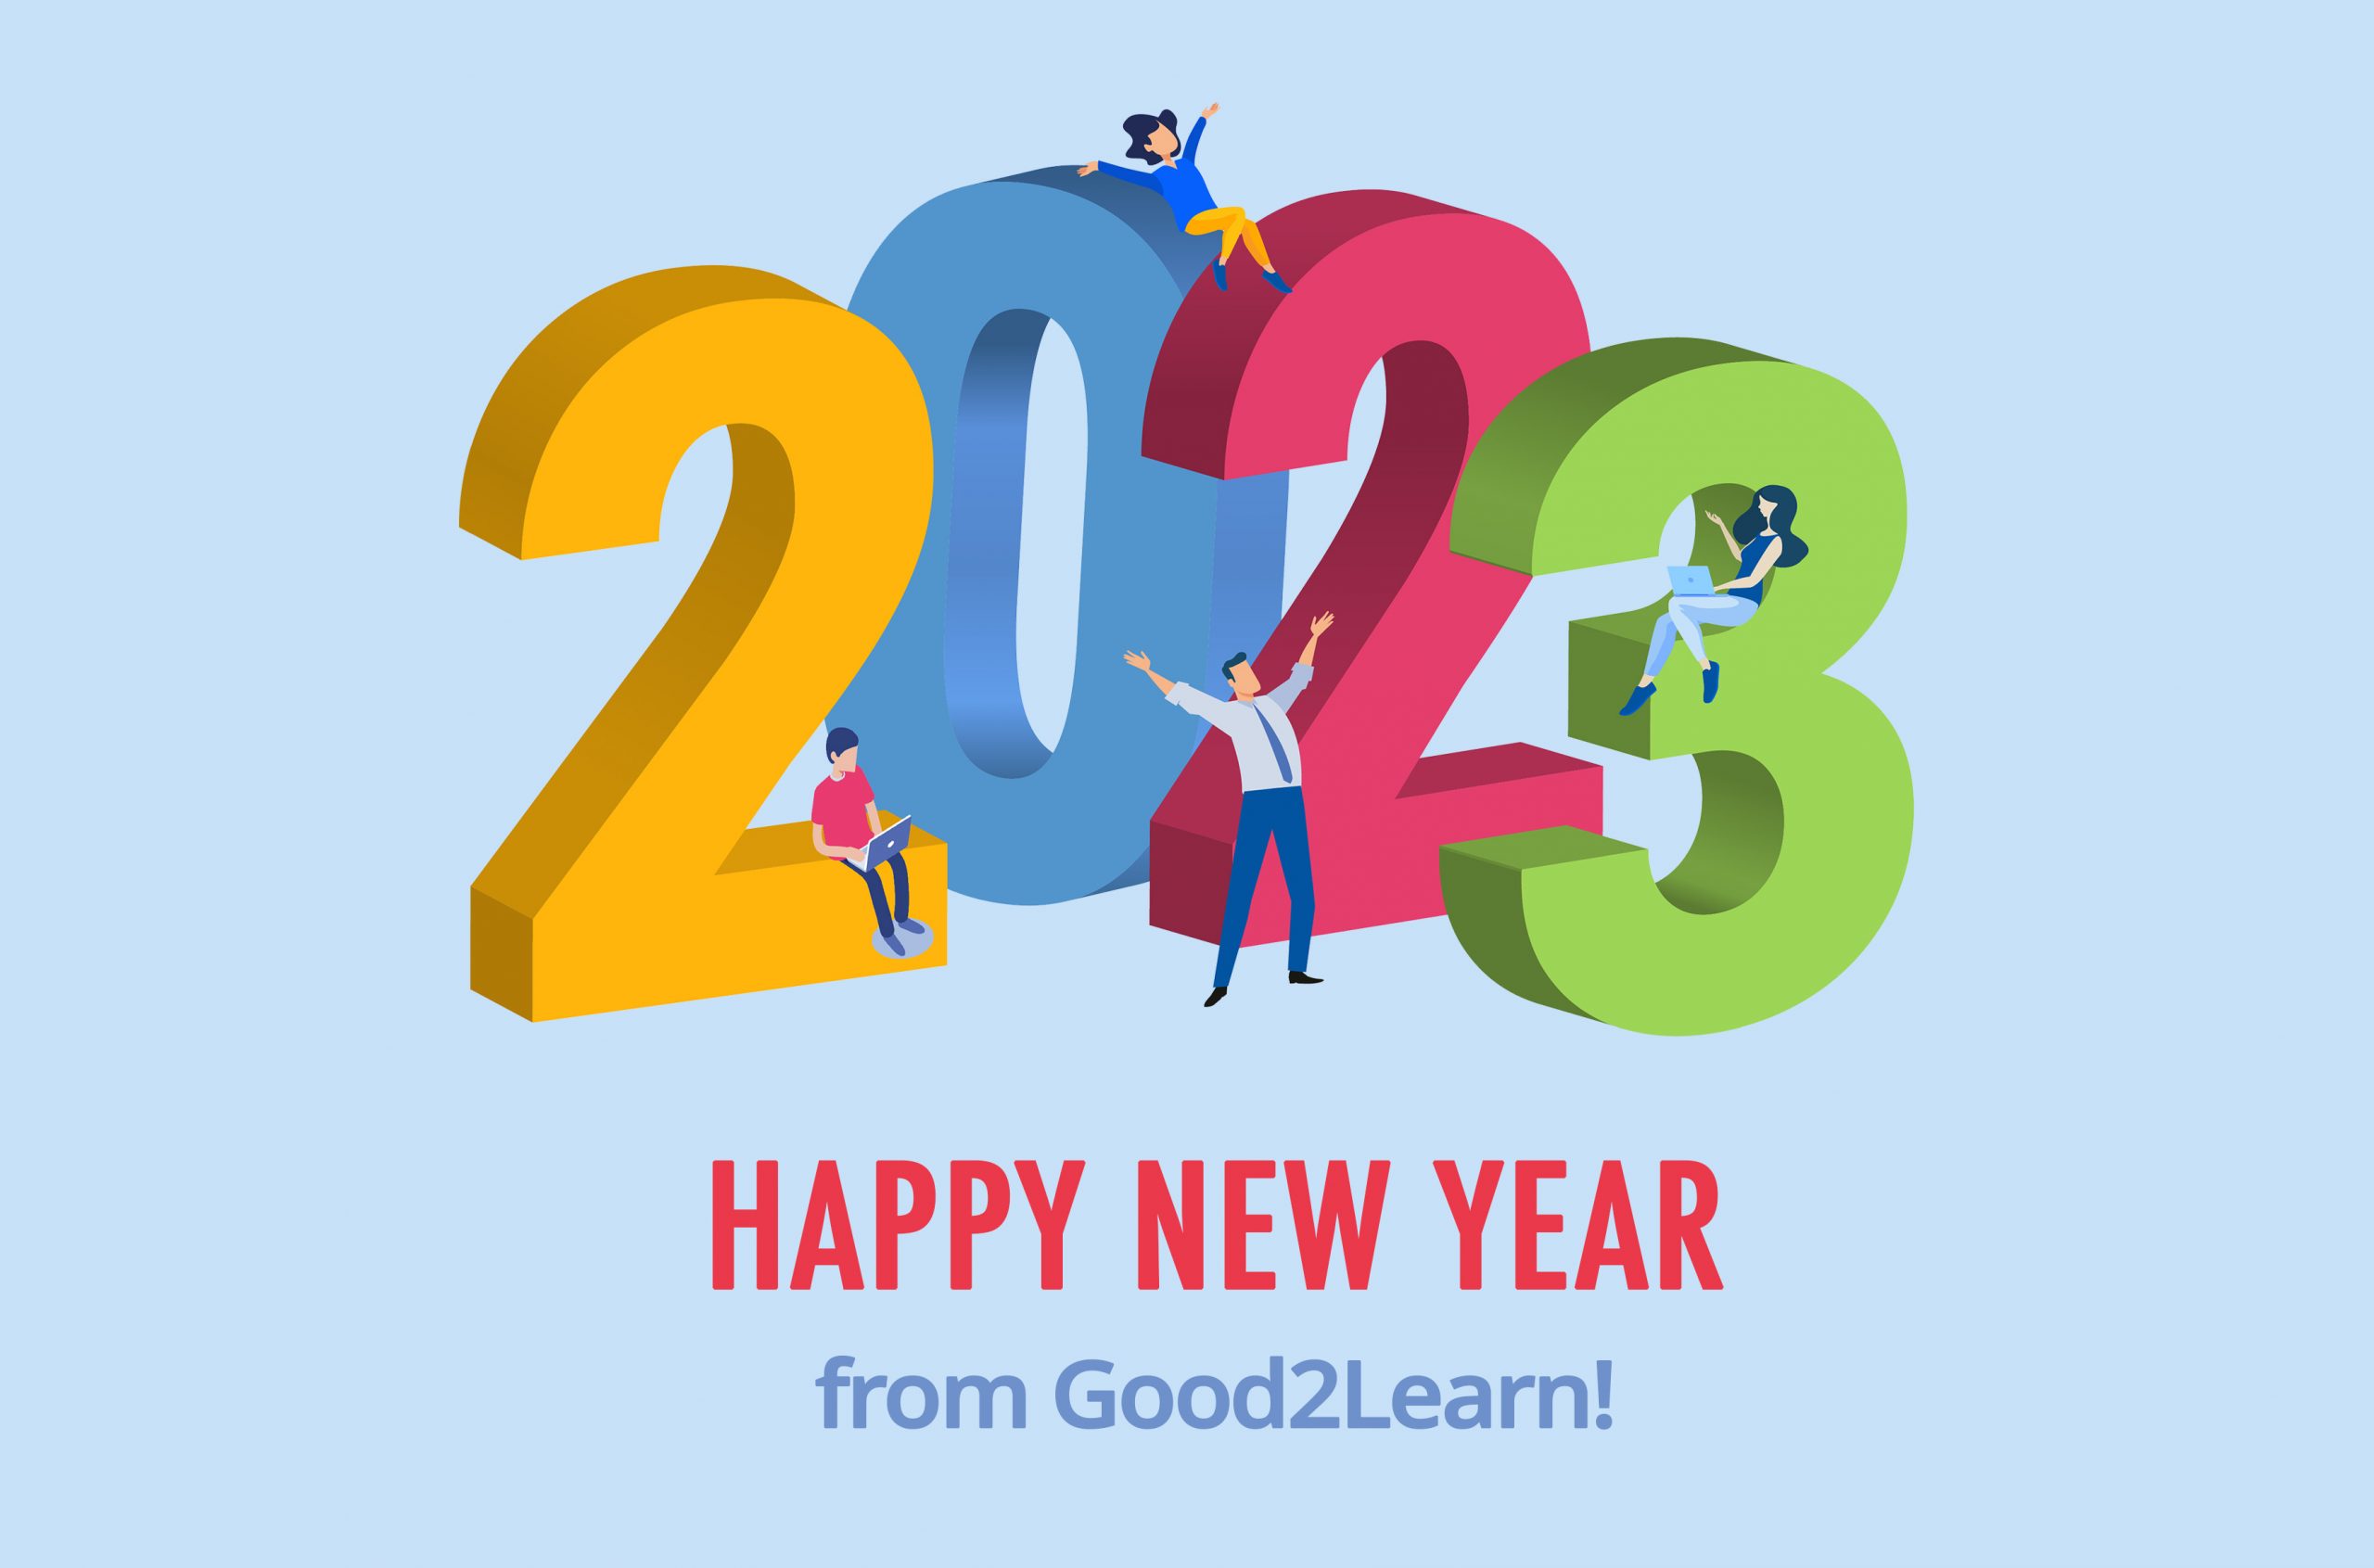 2023 wishes from Good2Learn